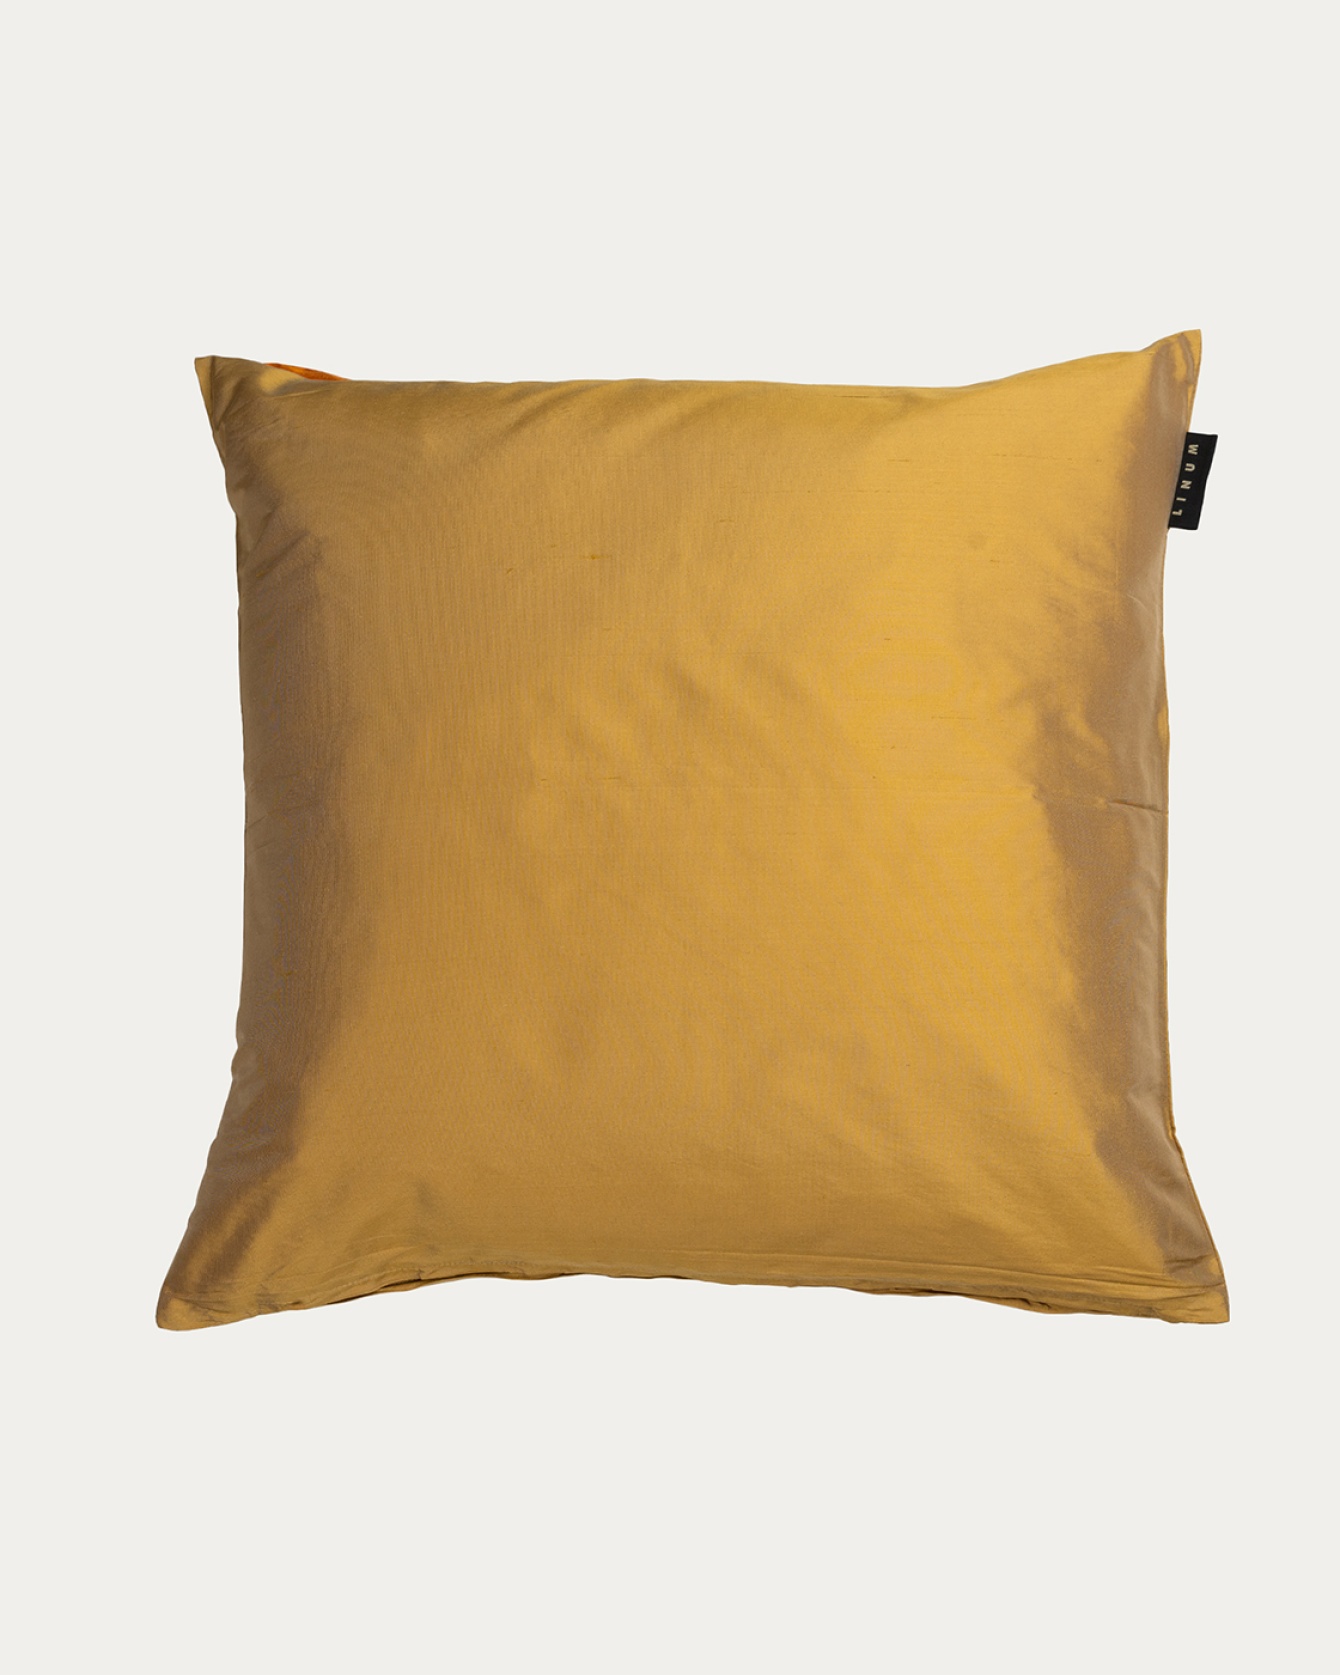 Product image straw yellow SILK cushion cover made of 100% dupion silk that gives a nice lustre from LINUM DESIGN. Size 50x50 cm.